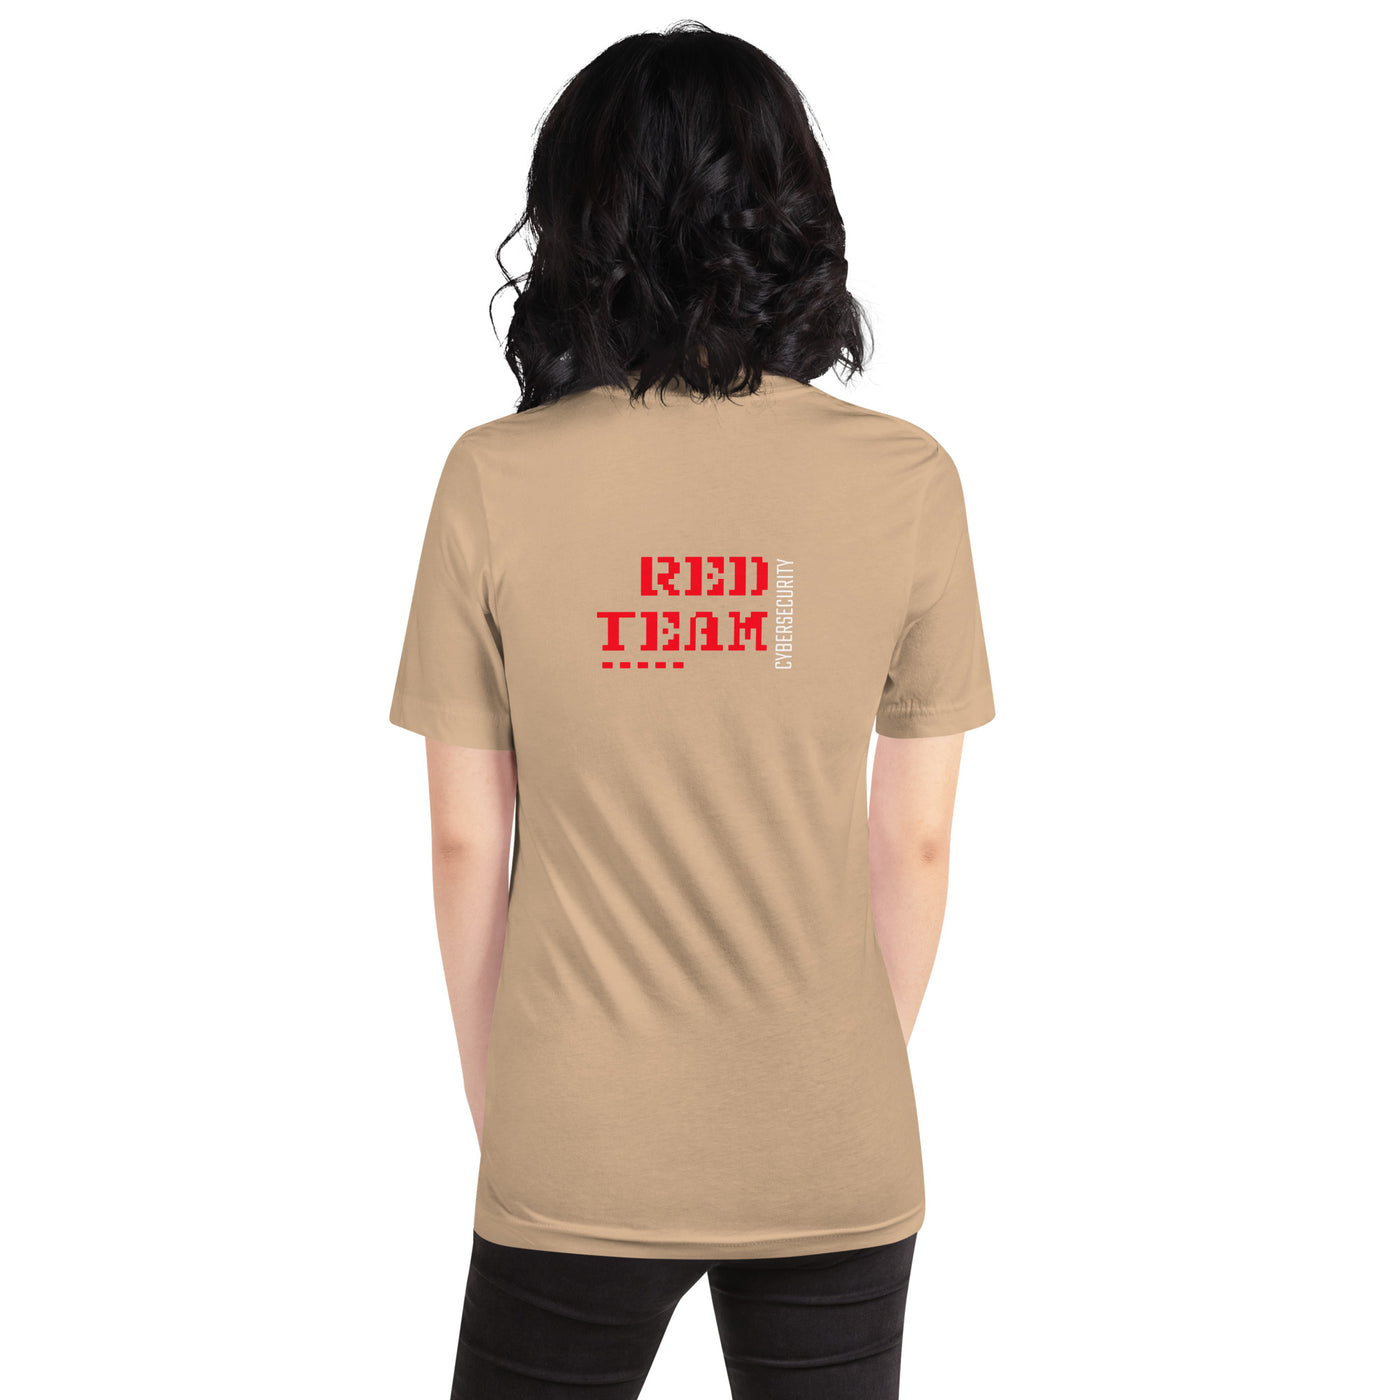 Cyber Security Red Team V15 - Unisex t-shirt ( Back Print )